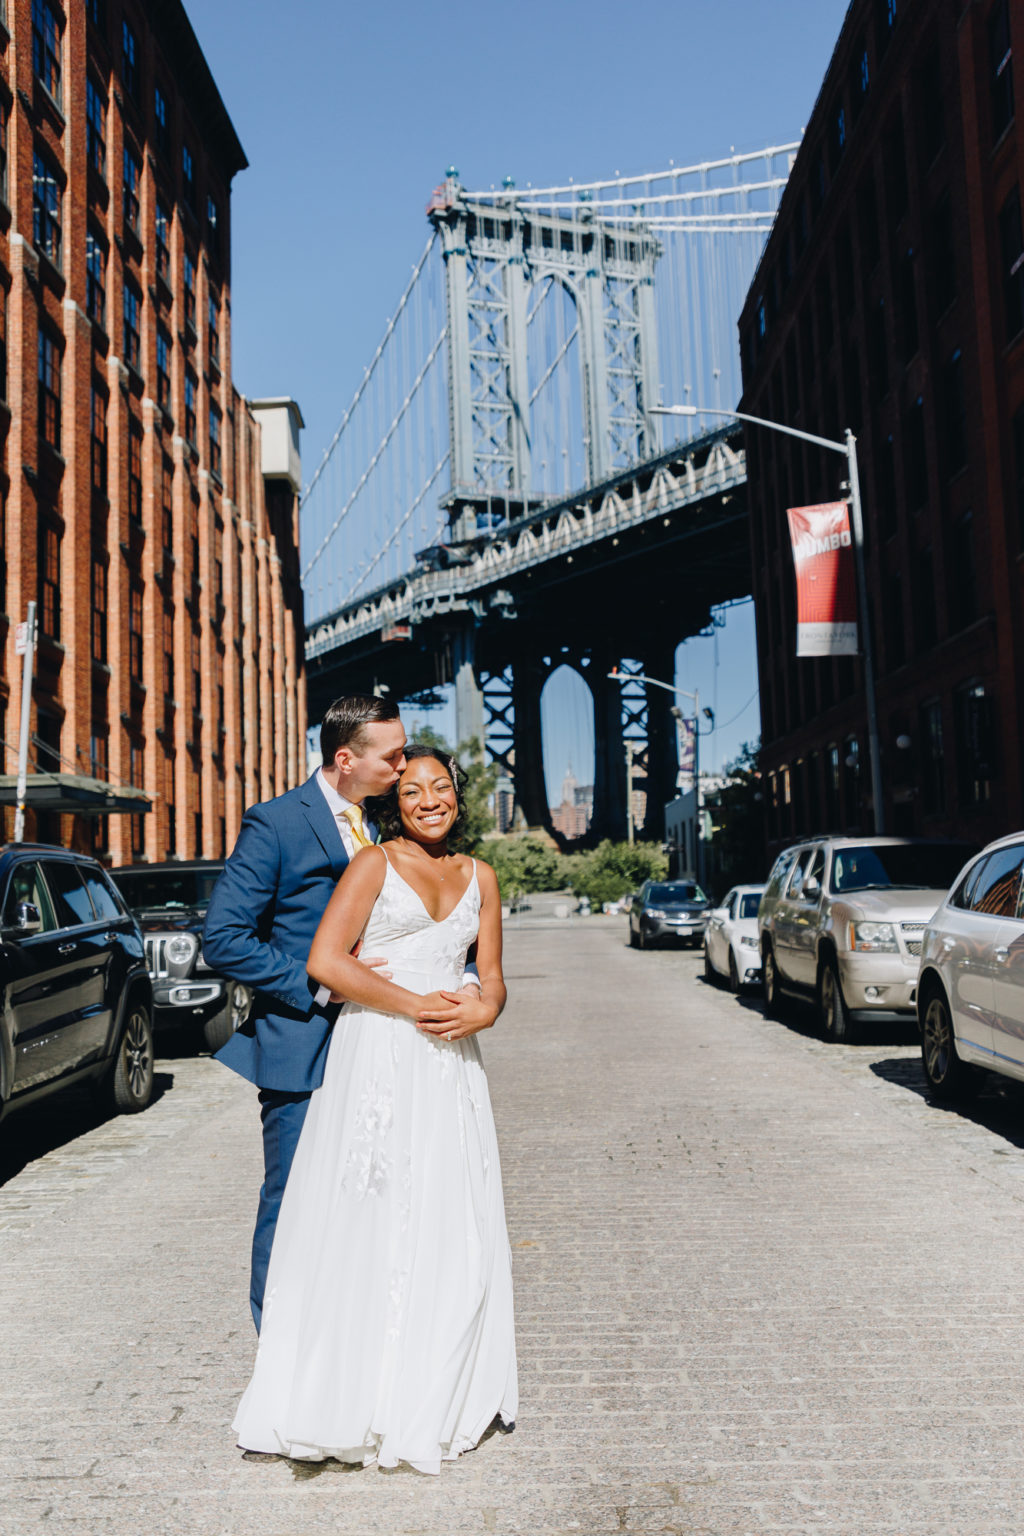 The Top Brooklyn Wedding Photo Locations for Iconic Images